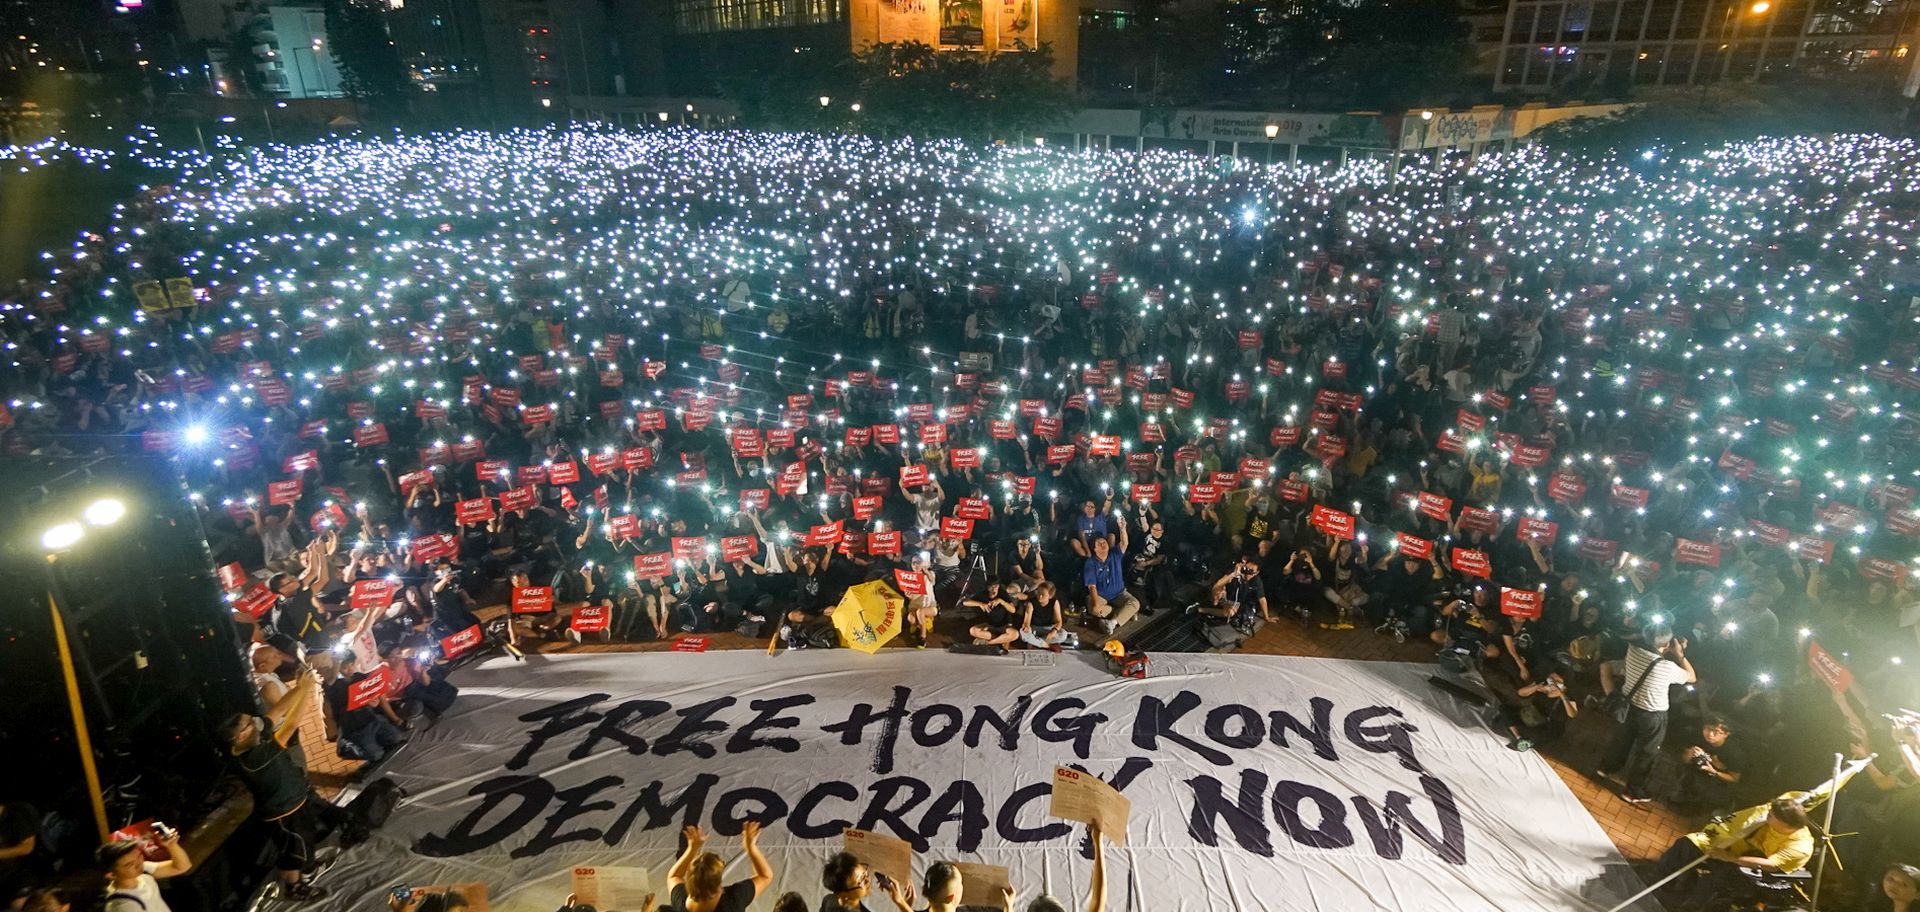 epa07674949 A handout photo made available by Civil Human Rights Front shows protesters at a rally themed 'Free Hong Kong, democracy now' in Hong Kong, China, 26 June 2019. Thousands took part in the rally, hosted by the Civil Human Rights Front, demanding the full withdrawal of the extradition bill, retraction of characterisation of the June 12 protest as a 'riot,' an investigation into alleged police violence, to absolve all arrested protesters, and the resignation of Hong Kong Chief Executive Carrie Lam.  EPA/RAINBOW NG / HANDOUT MANDATORY CREDIT; RAINBOW NG HANDOUT EDITORIAL USE ONLY/NO SALES/NO ARCHIVES